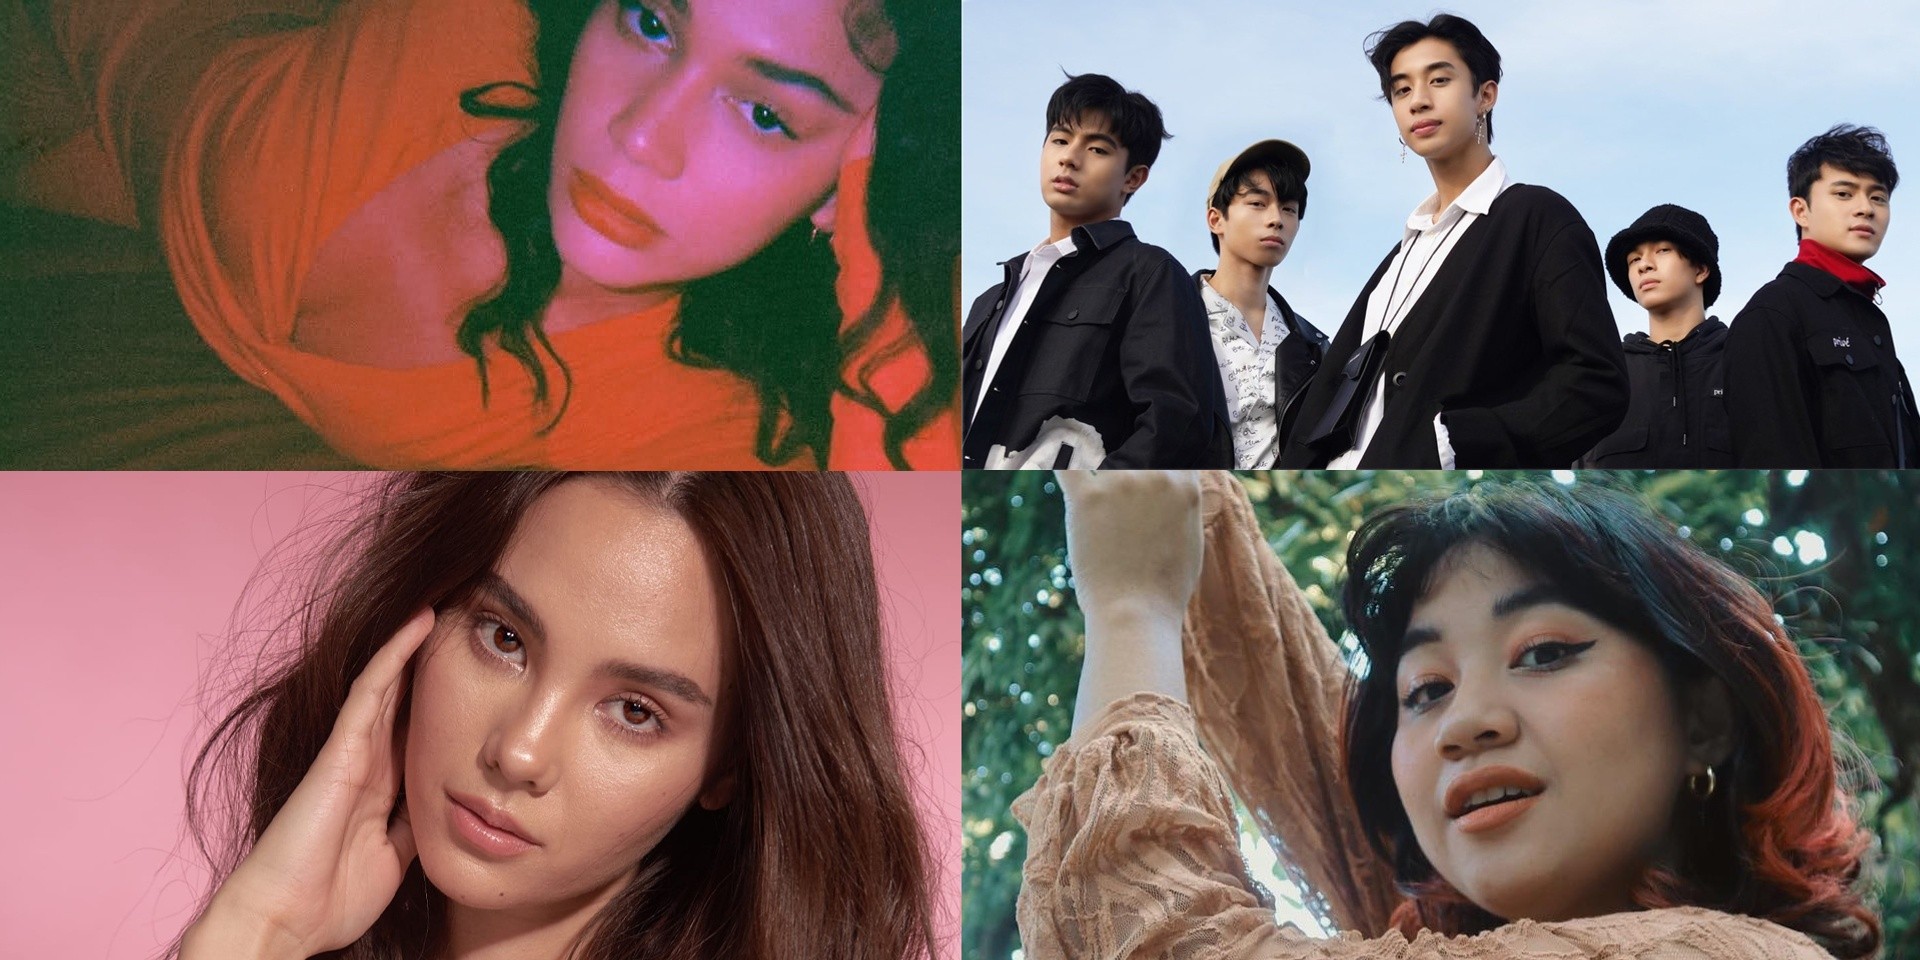 Jess Connelly, BGYO, Catriona Gray, Coeli, and more release new music – listen